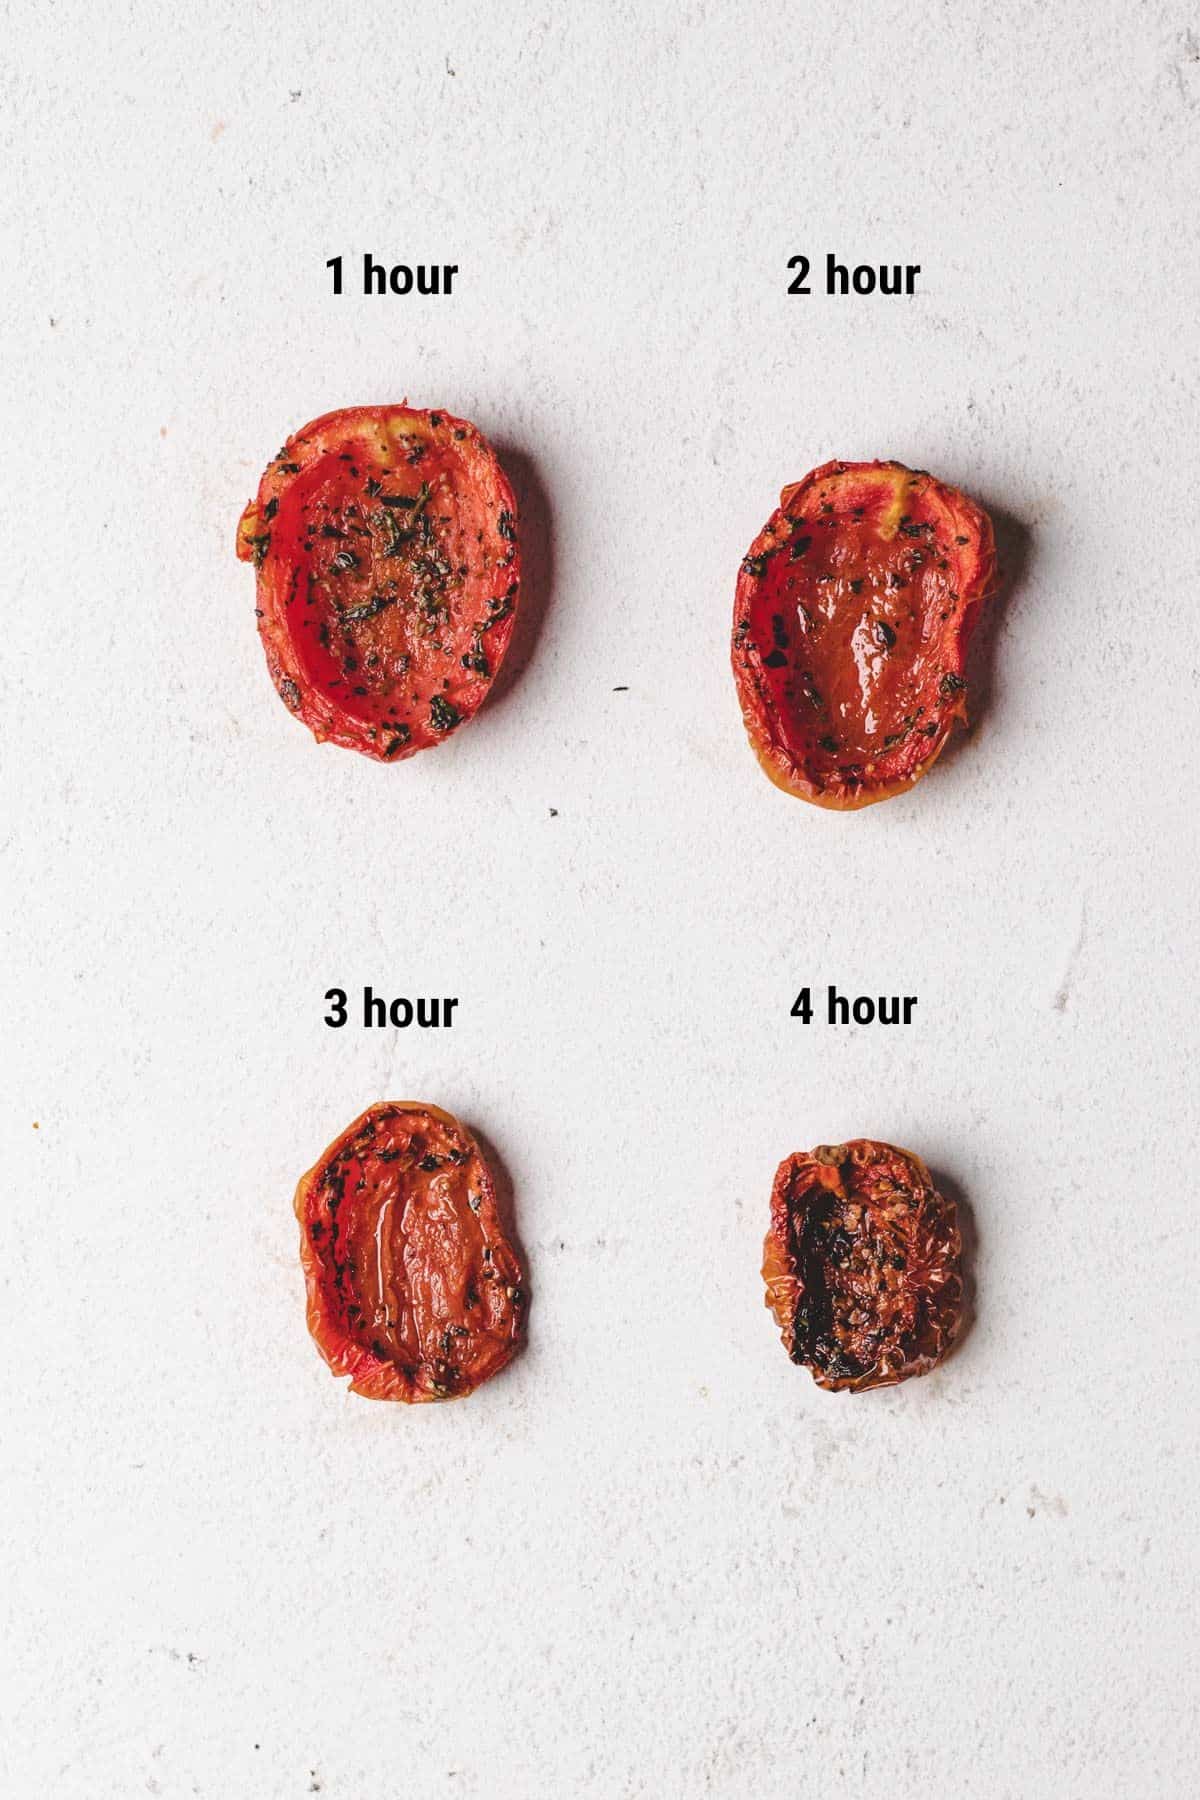 A photo that shows a comparison of slow roasted tomatoes cooked for different lengths of time.